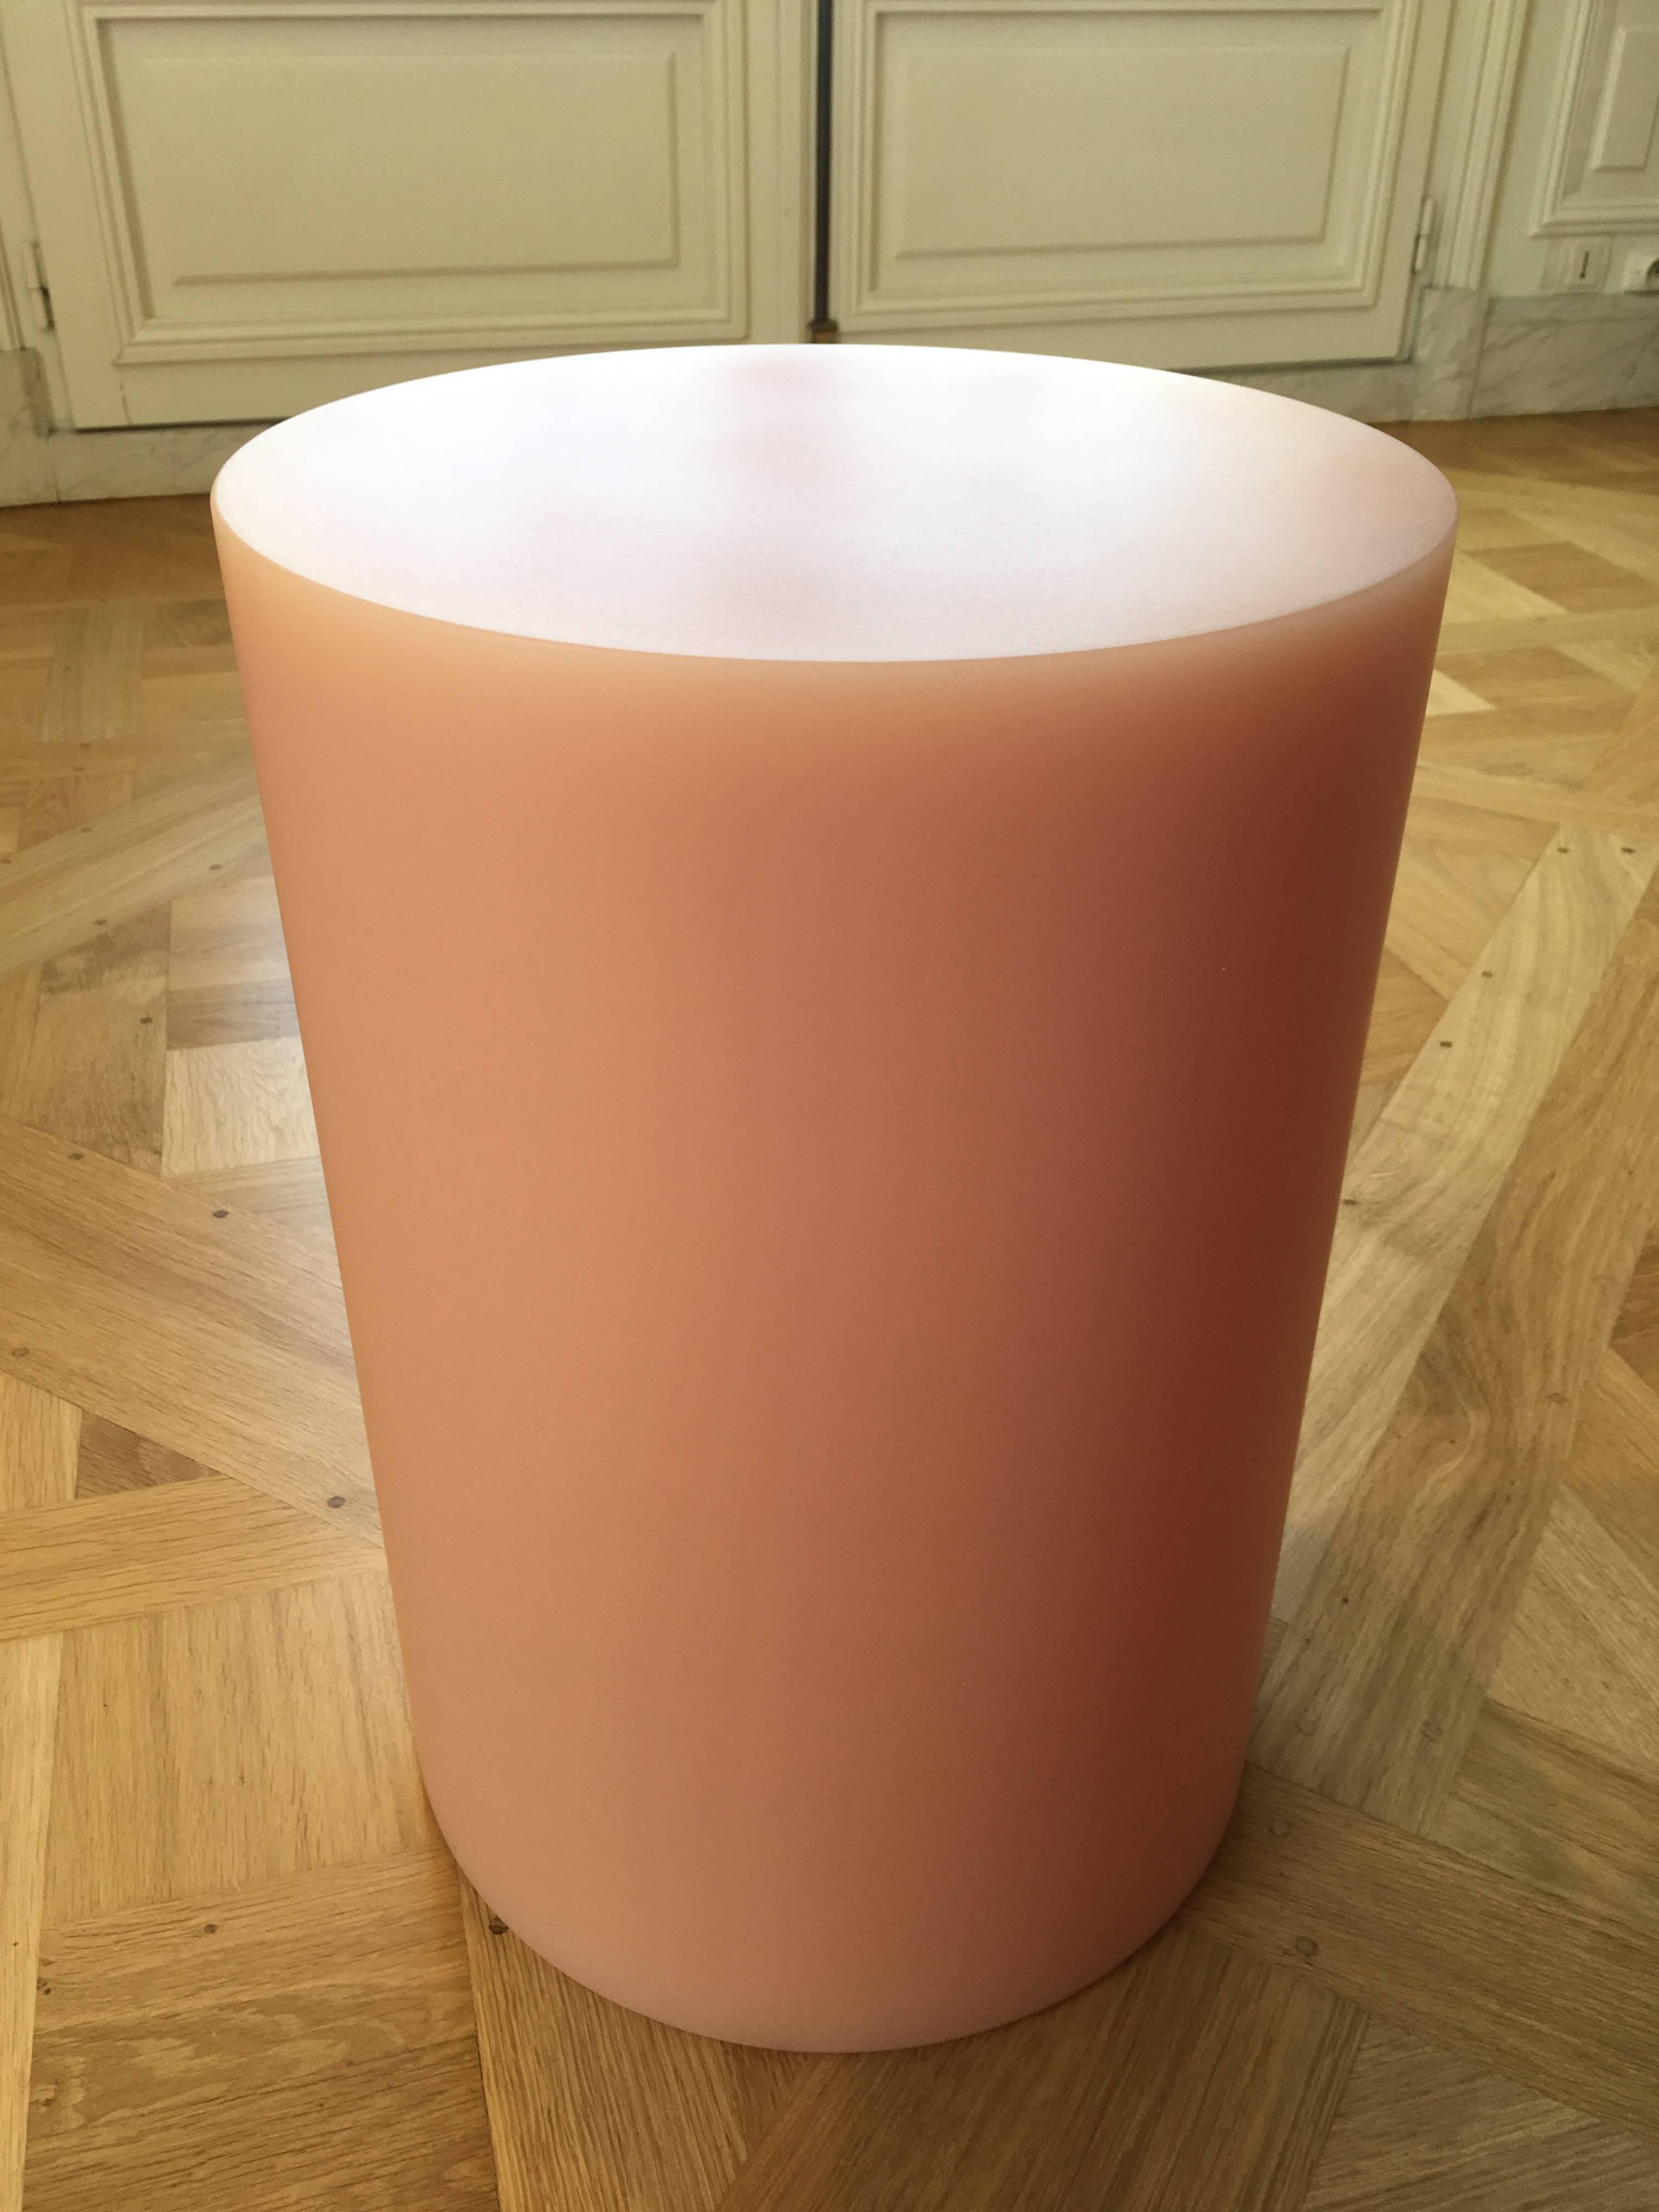 Sabine Marcelis’ new salmon pink Soap Column stools are unveiled at Nomad Monaco 2018, creating a pastel and sculptural mise-en-scéne along with the new round Soap table.